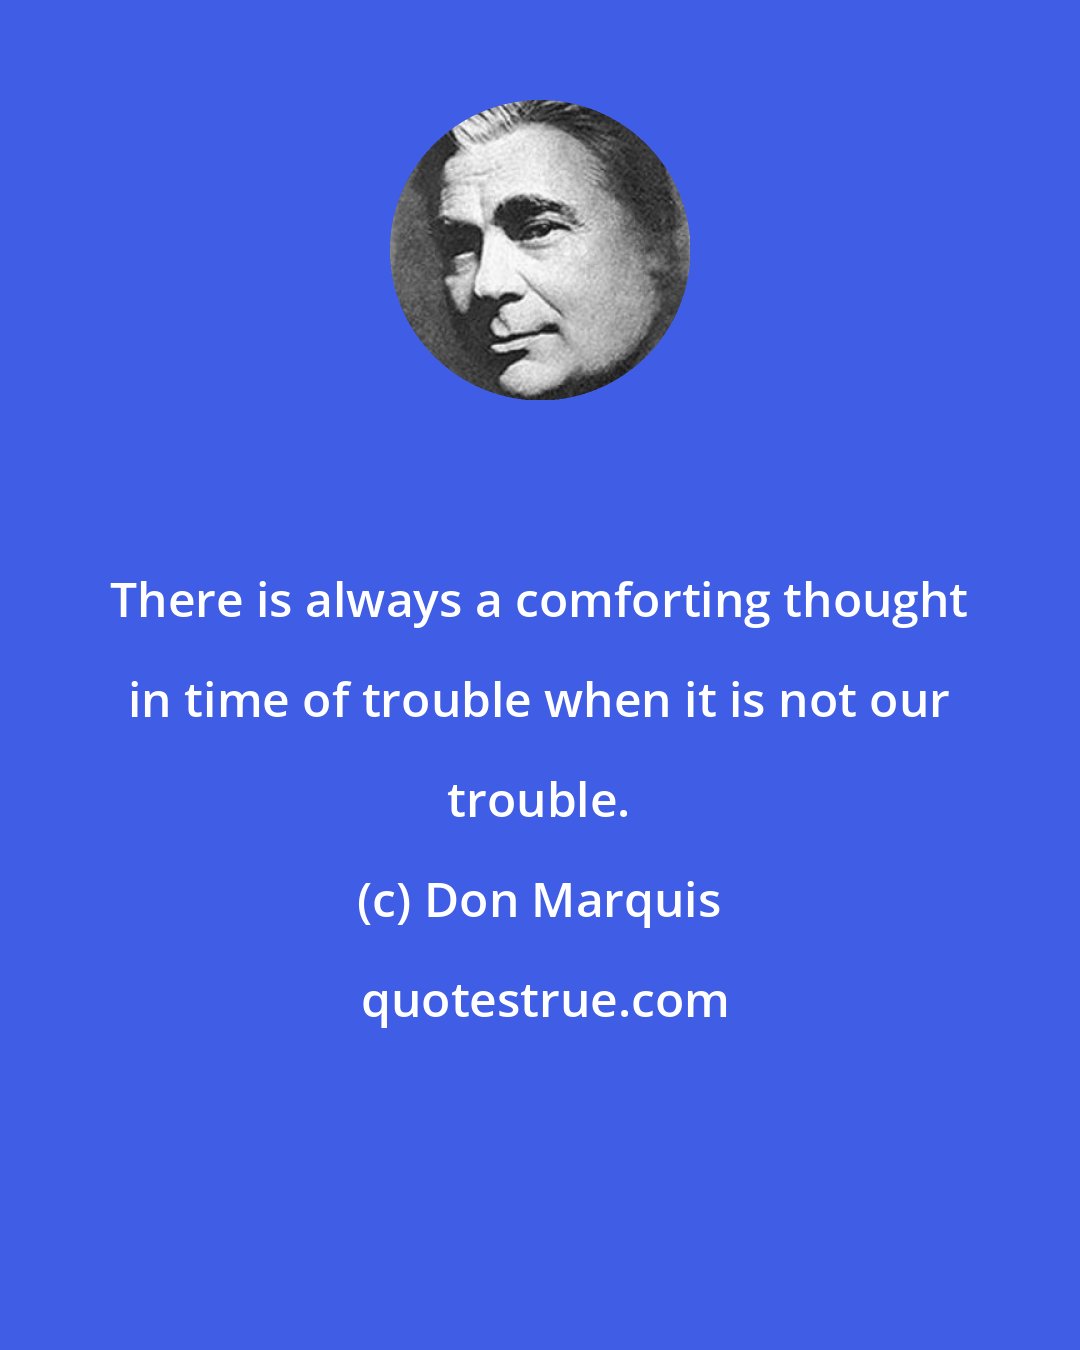 Don Marquis: There is always a comforting thought in time of trouble when it is not our trouble.